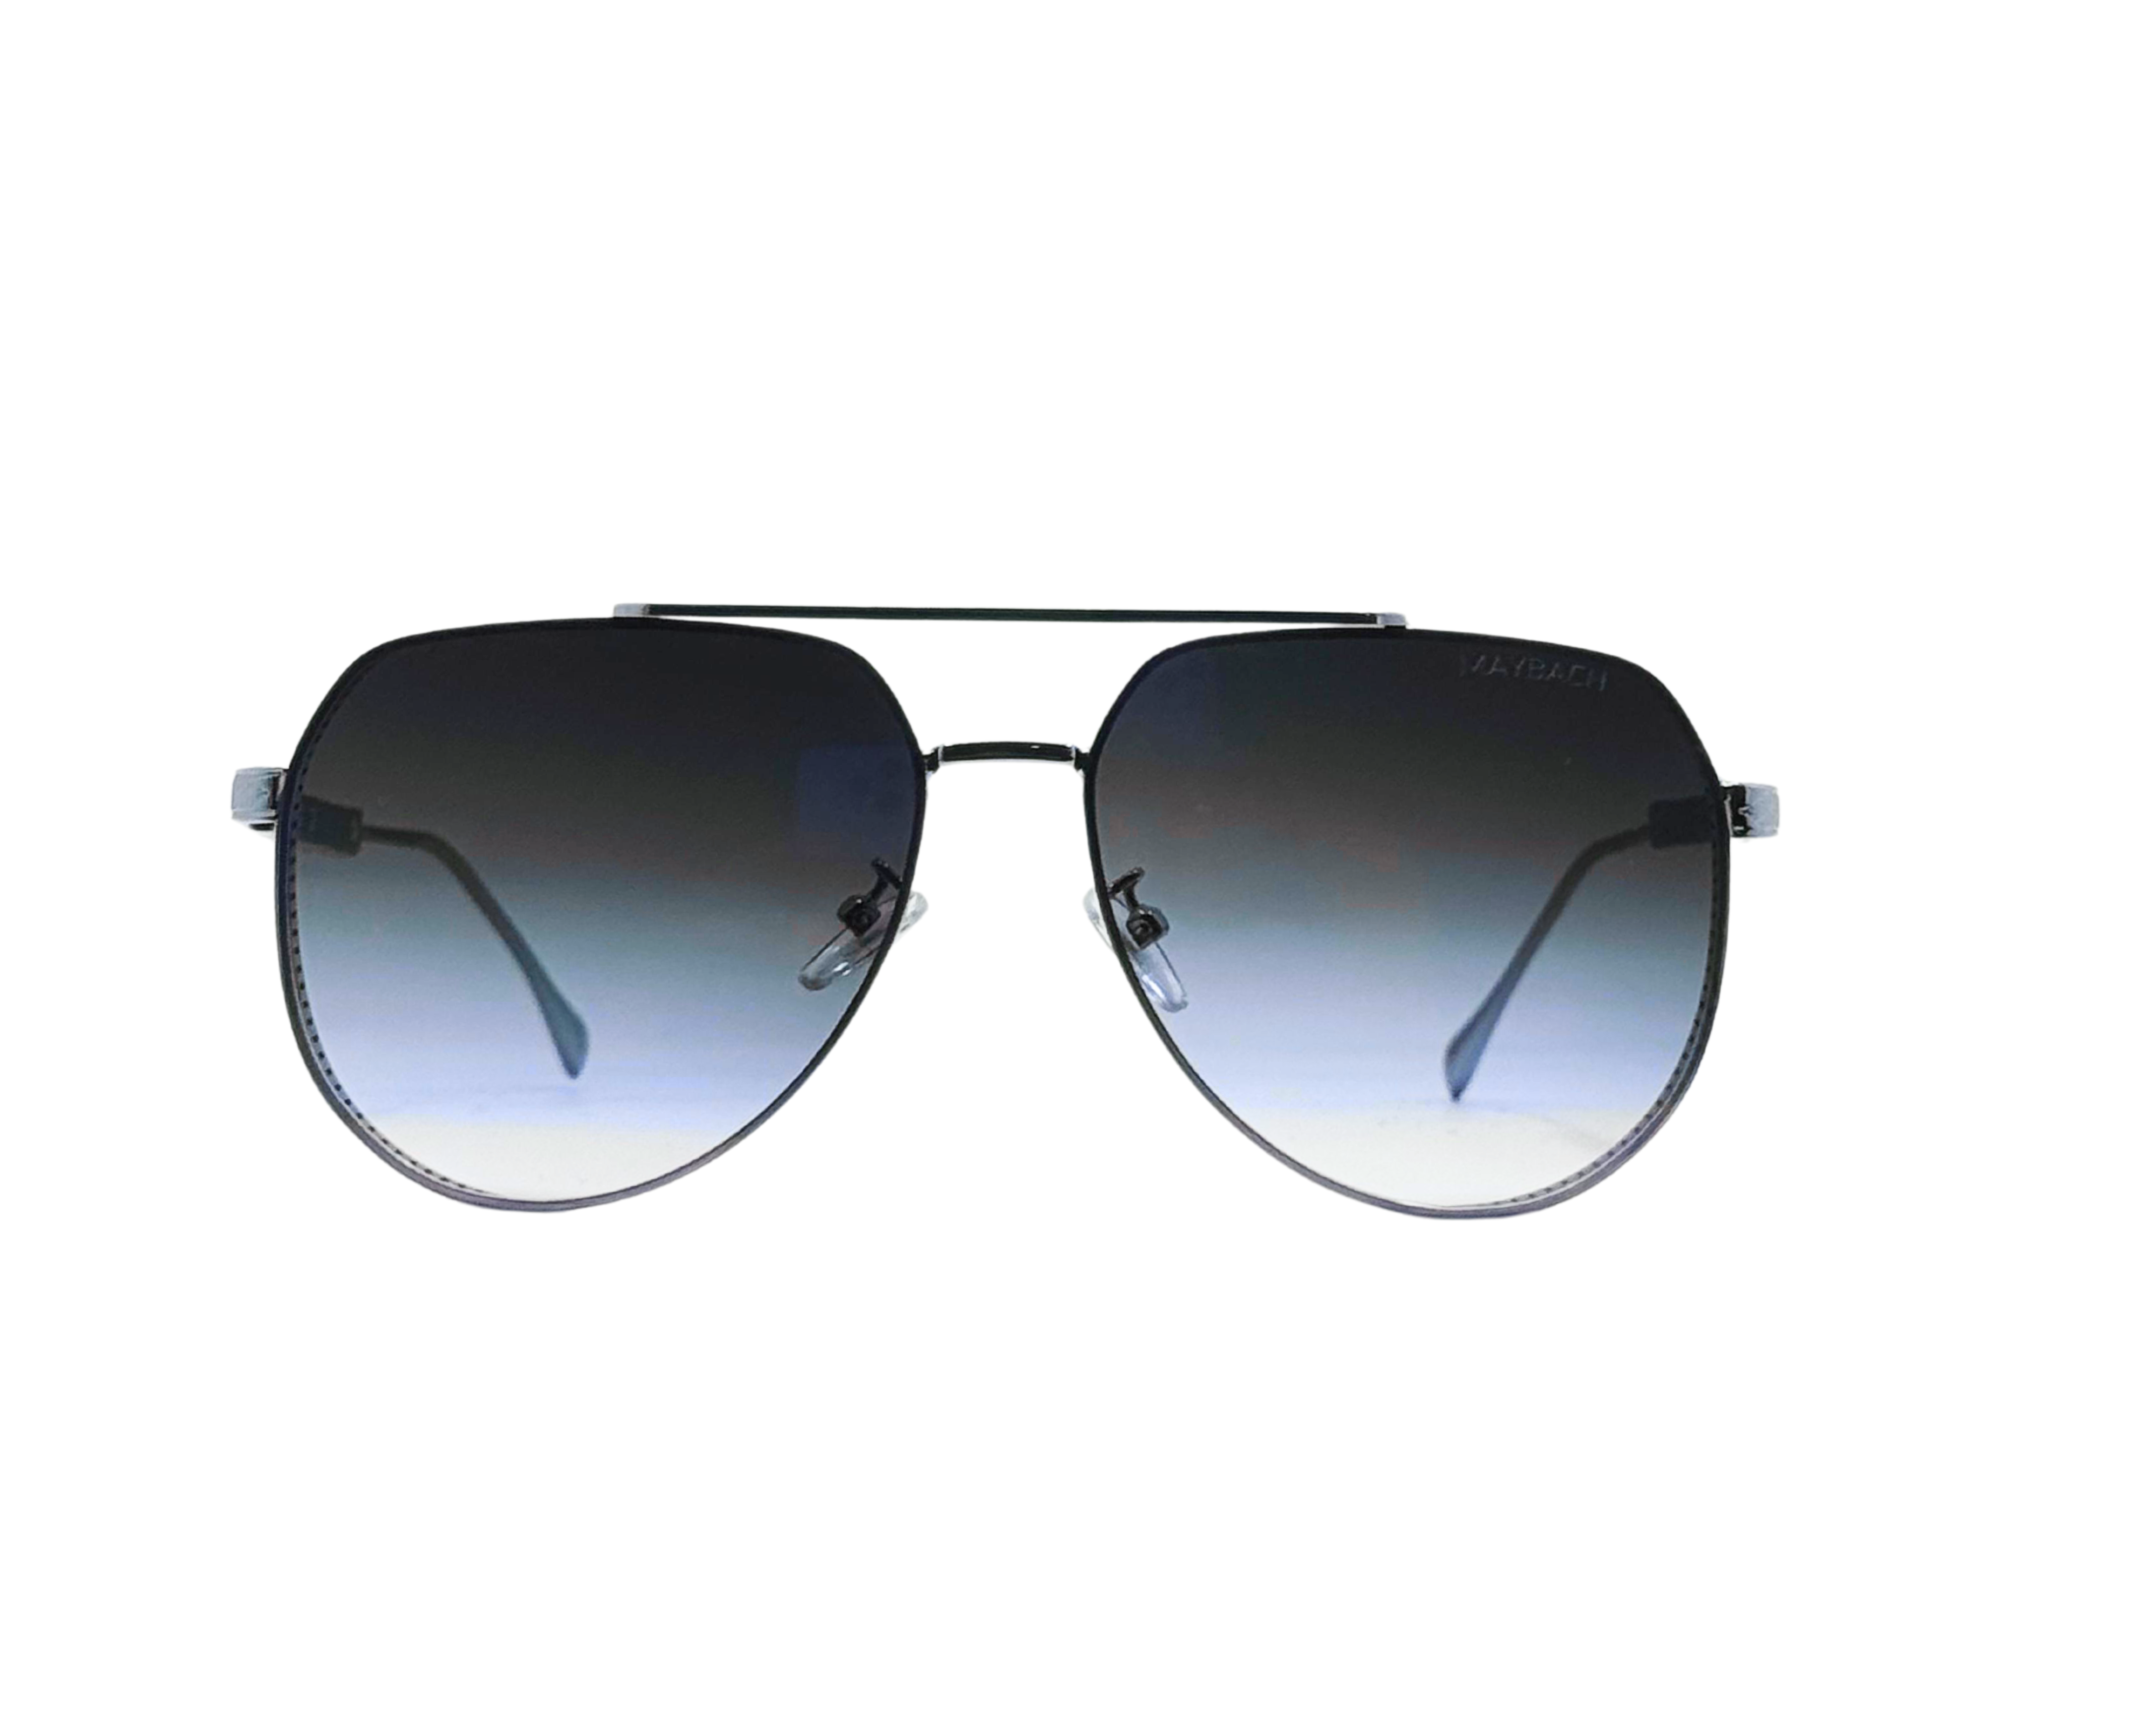 NS Deluxe - 760 - Maybach - Sunglasses